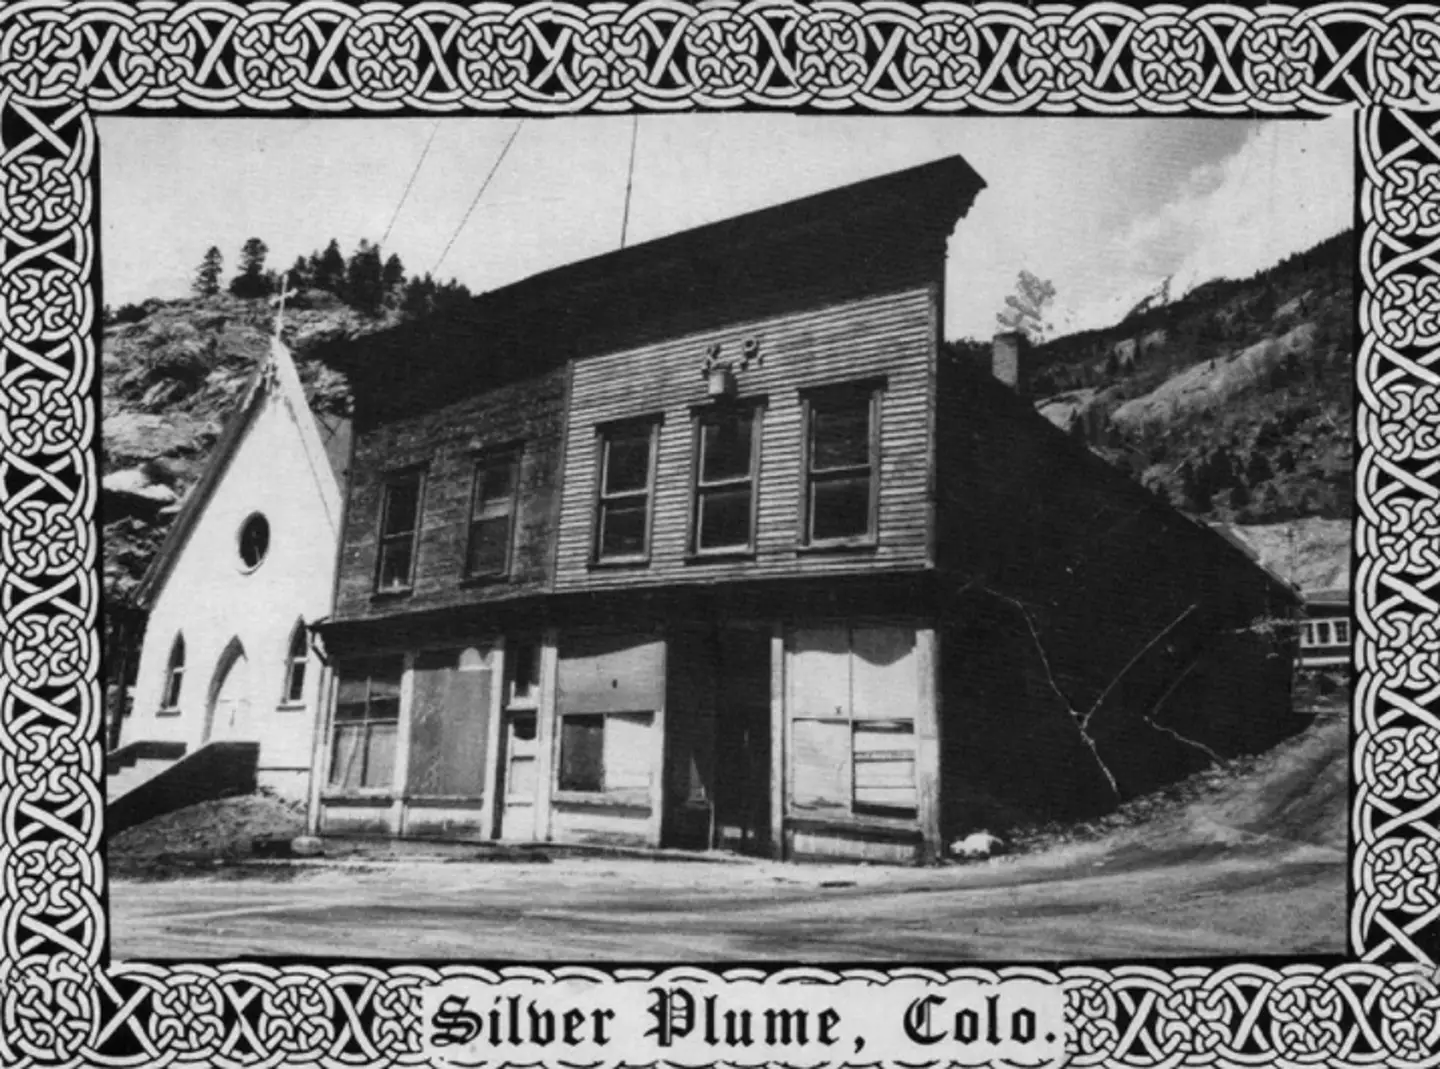 Reinhard sold Silver Plume postcards in his summer antiques shop. [